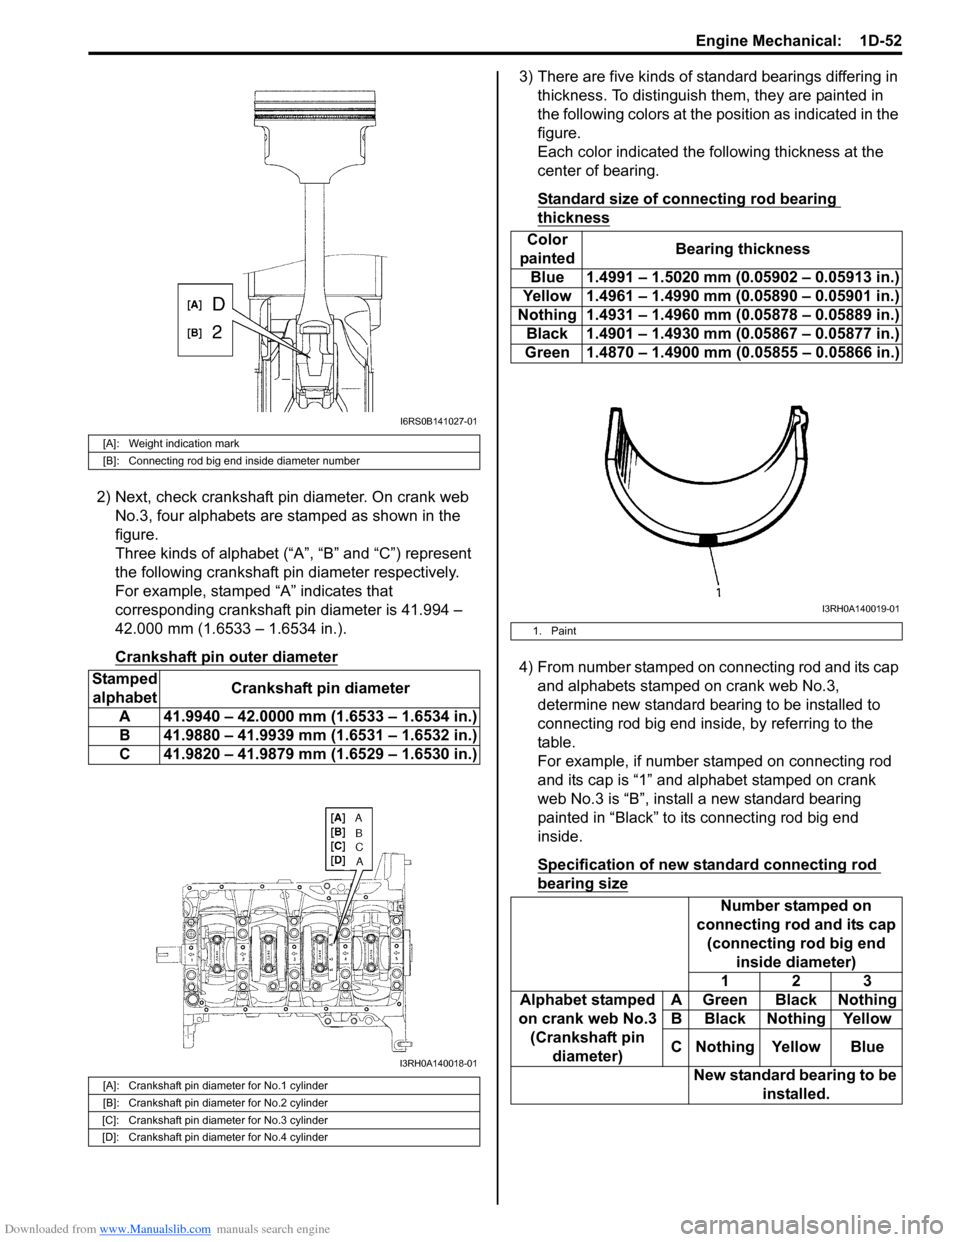 SUZUKI SWIFT 2005 2.G Service Workshop Manual Downloaded from www.Manualslib.com manuals search engine Engine Mechanical:  1D-52
2) Next, check crankshaft pin diameter. On crank web No.3, four alphabets are stamped as shown in the 
figure.
Three 